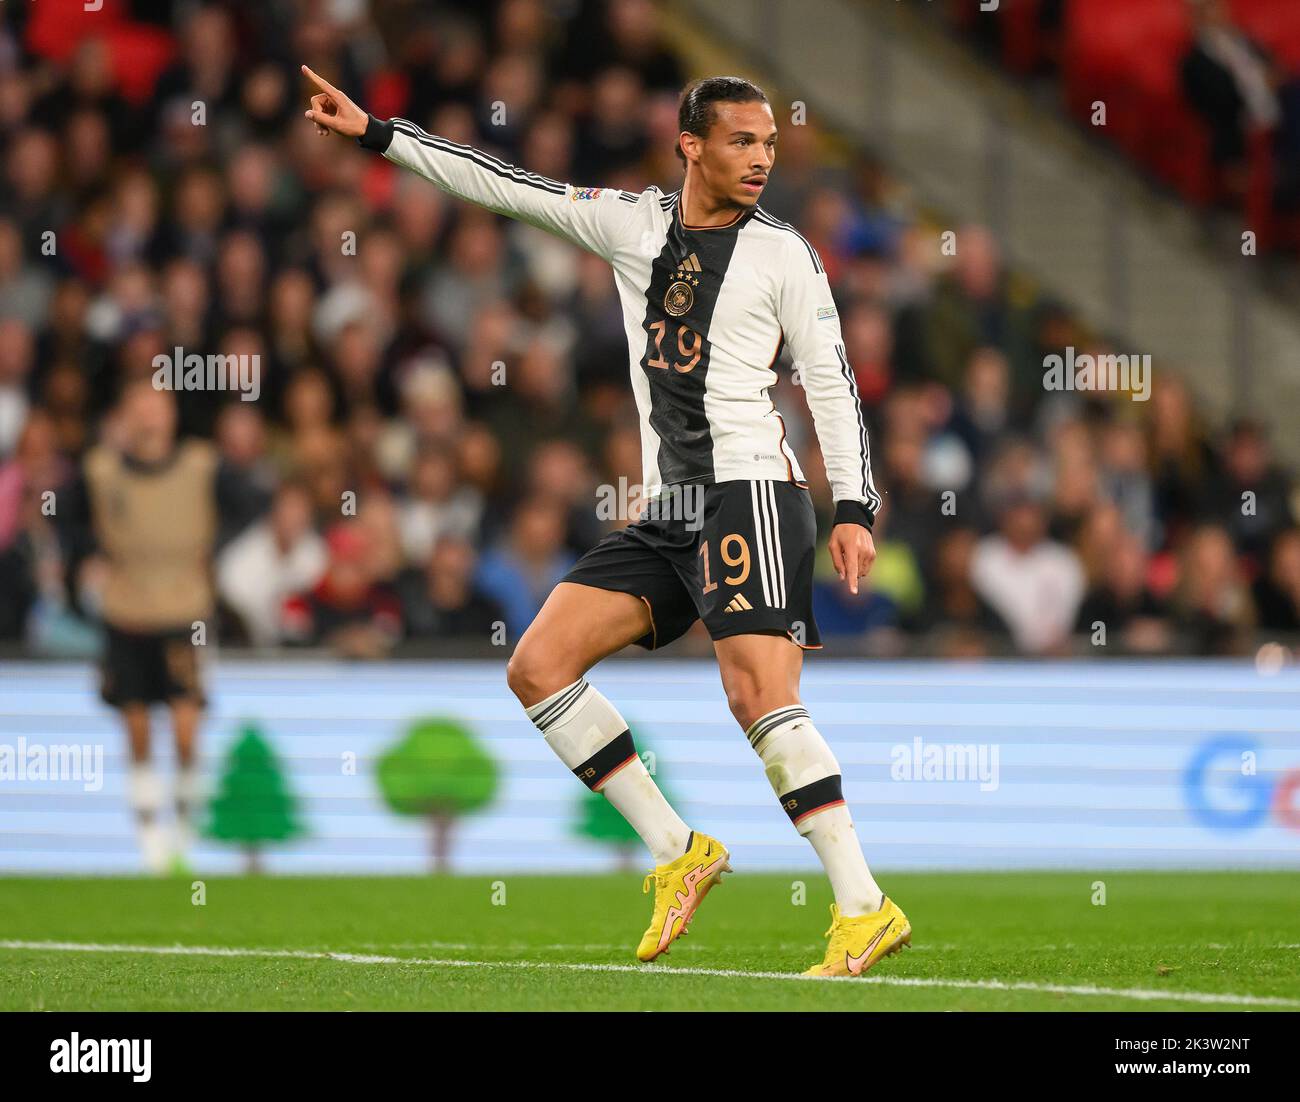 26 Sep 2022 - England v Germany - UEFA Nations League - League A - Group 3 - Wembley Stadium  Germany's Leroy Sané during the UEFA Nations League match against England. Picture : Mark Pain / Alamy Live News Stock Photo